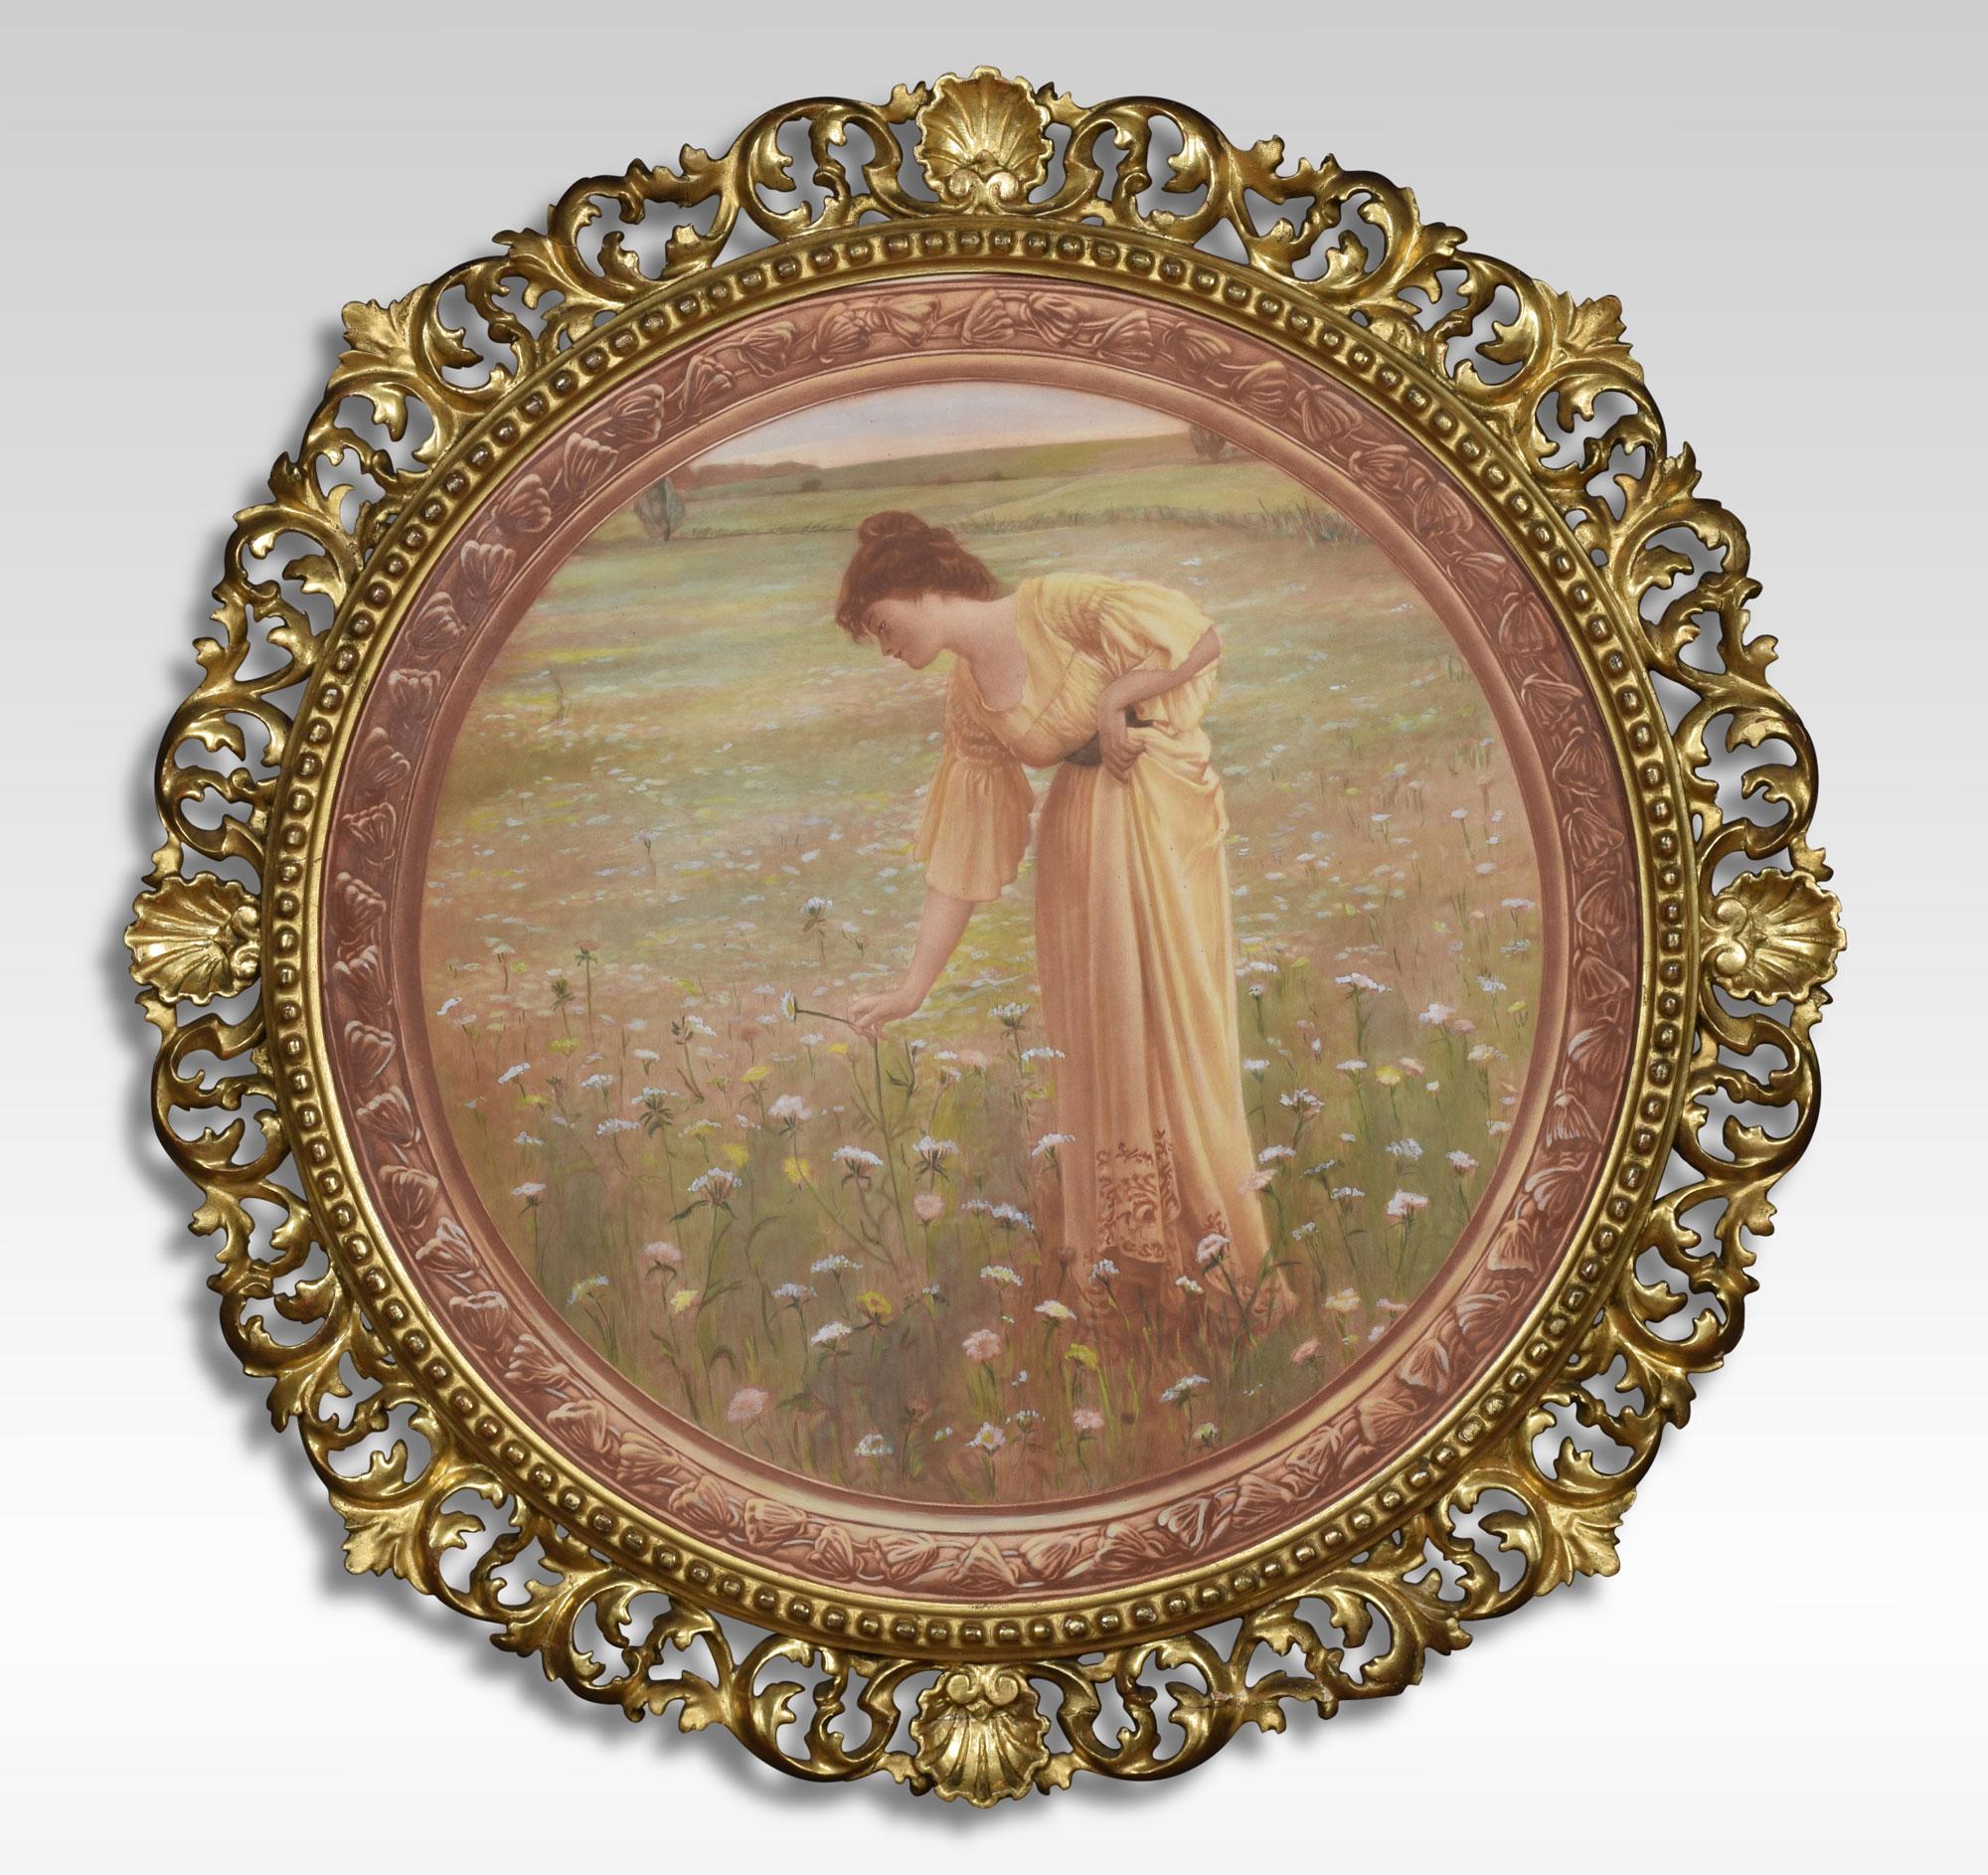 A pair of mezzotints, the sea hath its pearls and the flowers of the field. Hand-colored mezzotints printed in sepia. Enclosed in Florentine foliated, pierced, carved and gilt frames.
Dimensions:
Height 26 inches
Width 26 inches
Depth 1 inches.